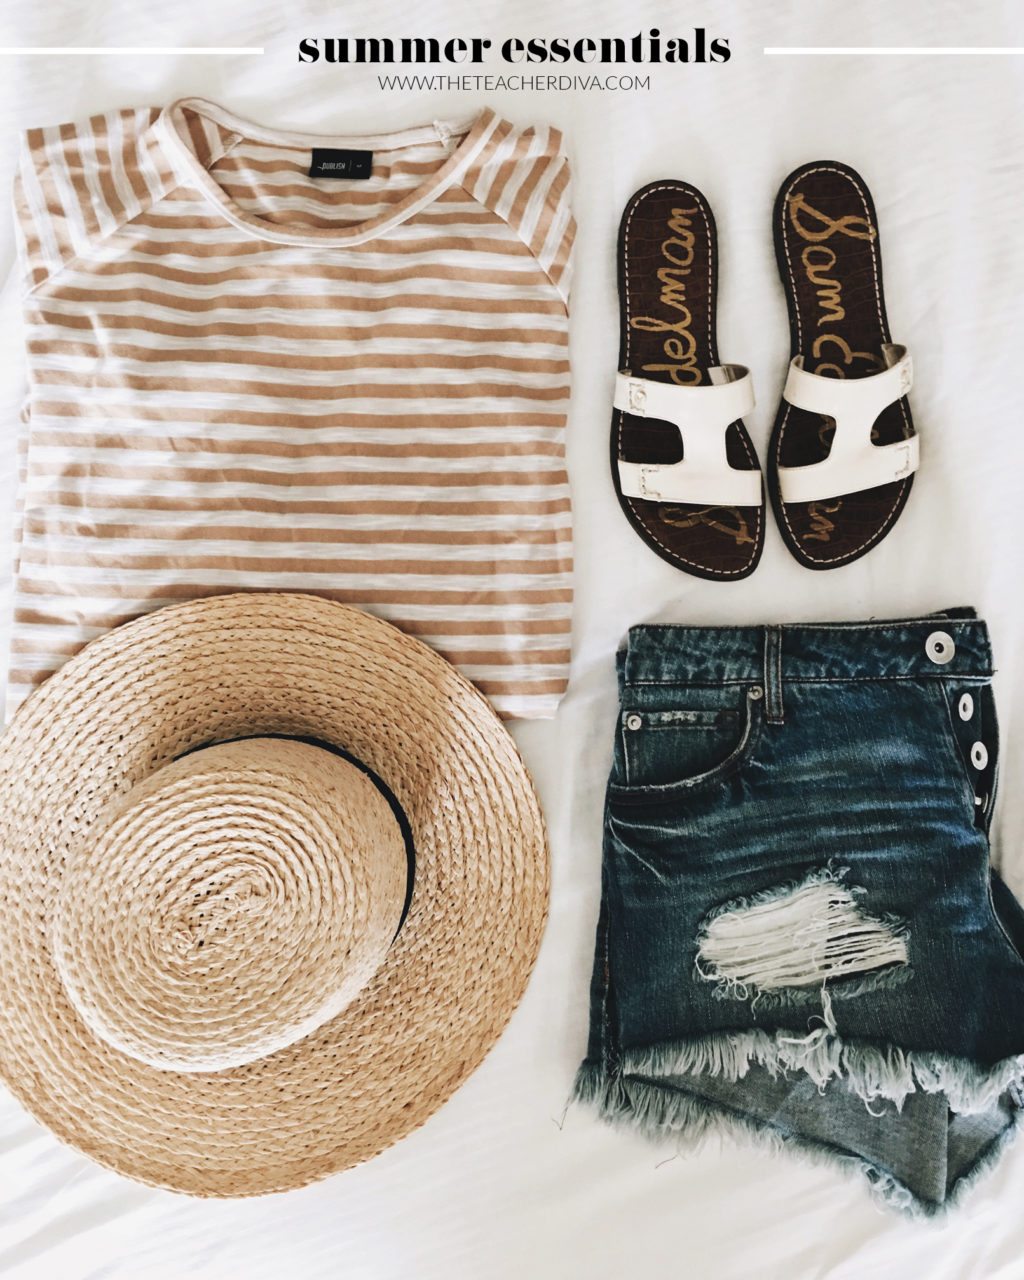 3 Hats You Need for Summer | The Teacher Diva: a Dallas Fashion Blog ...